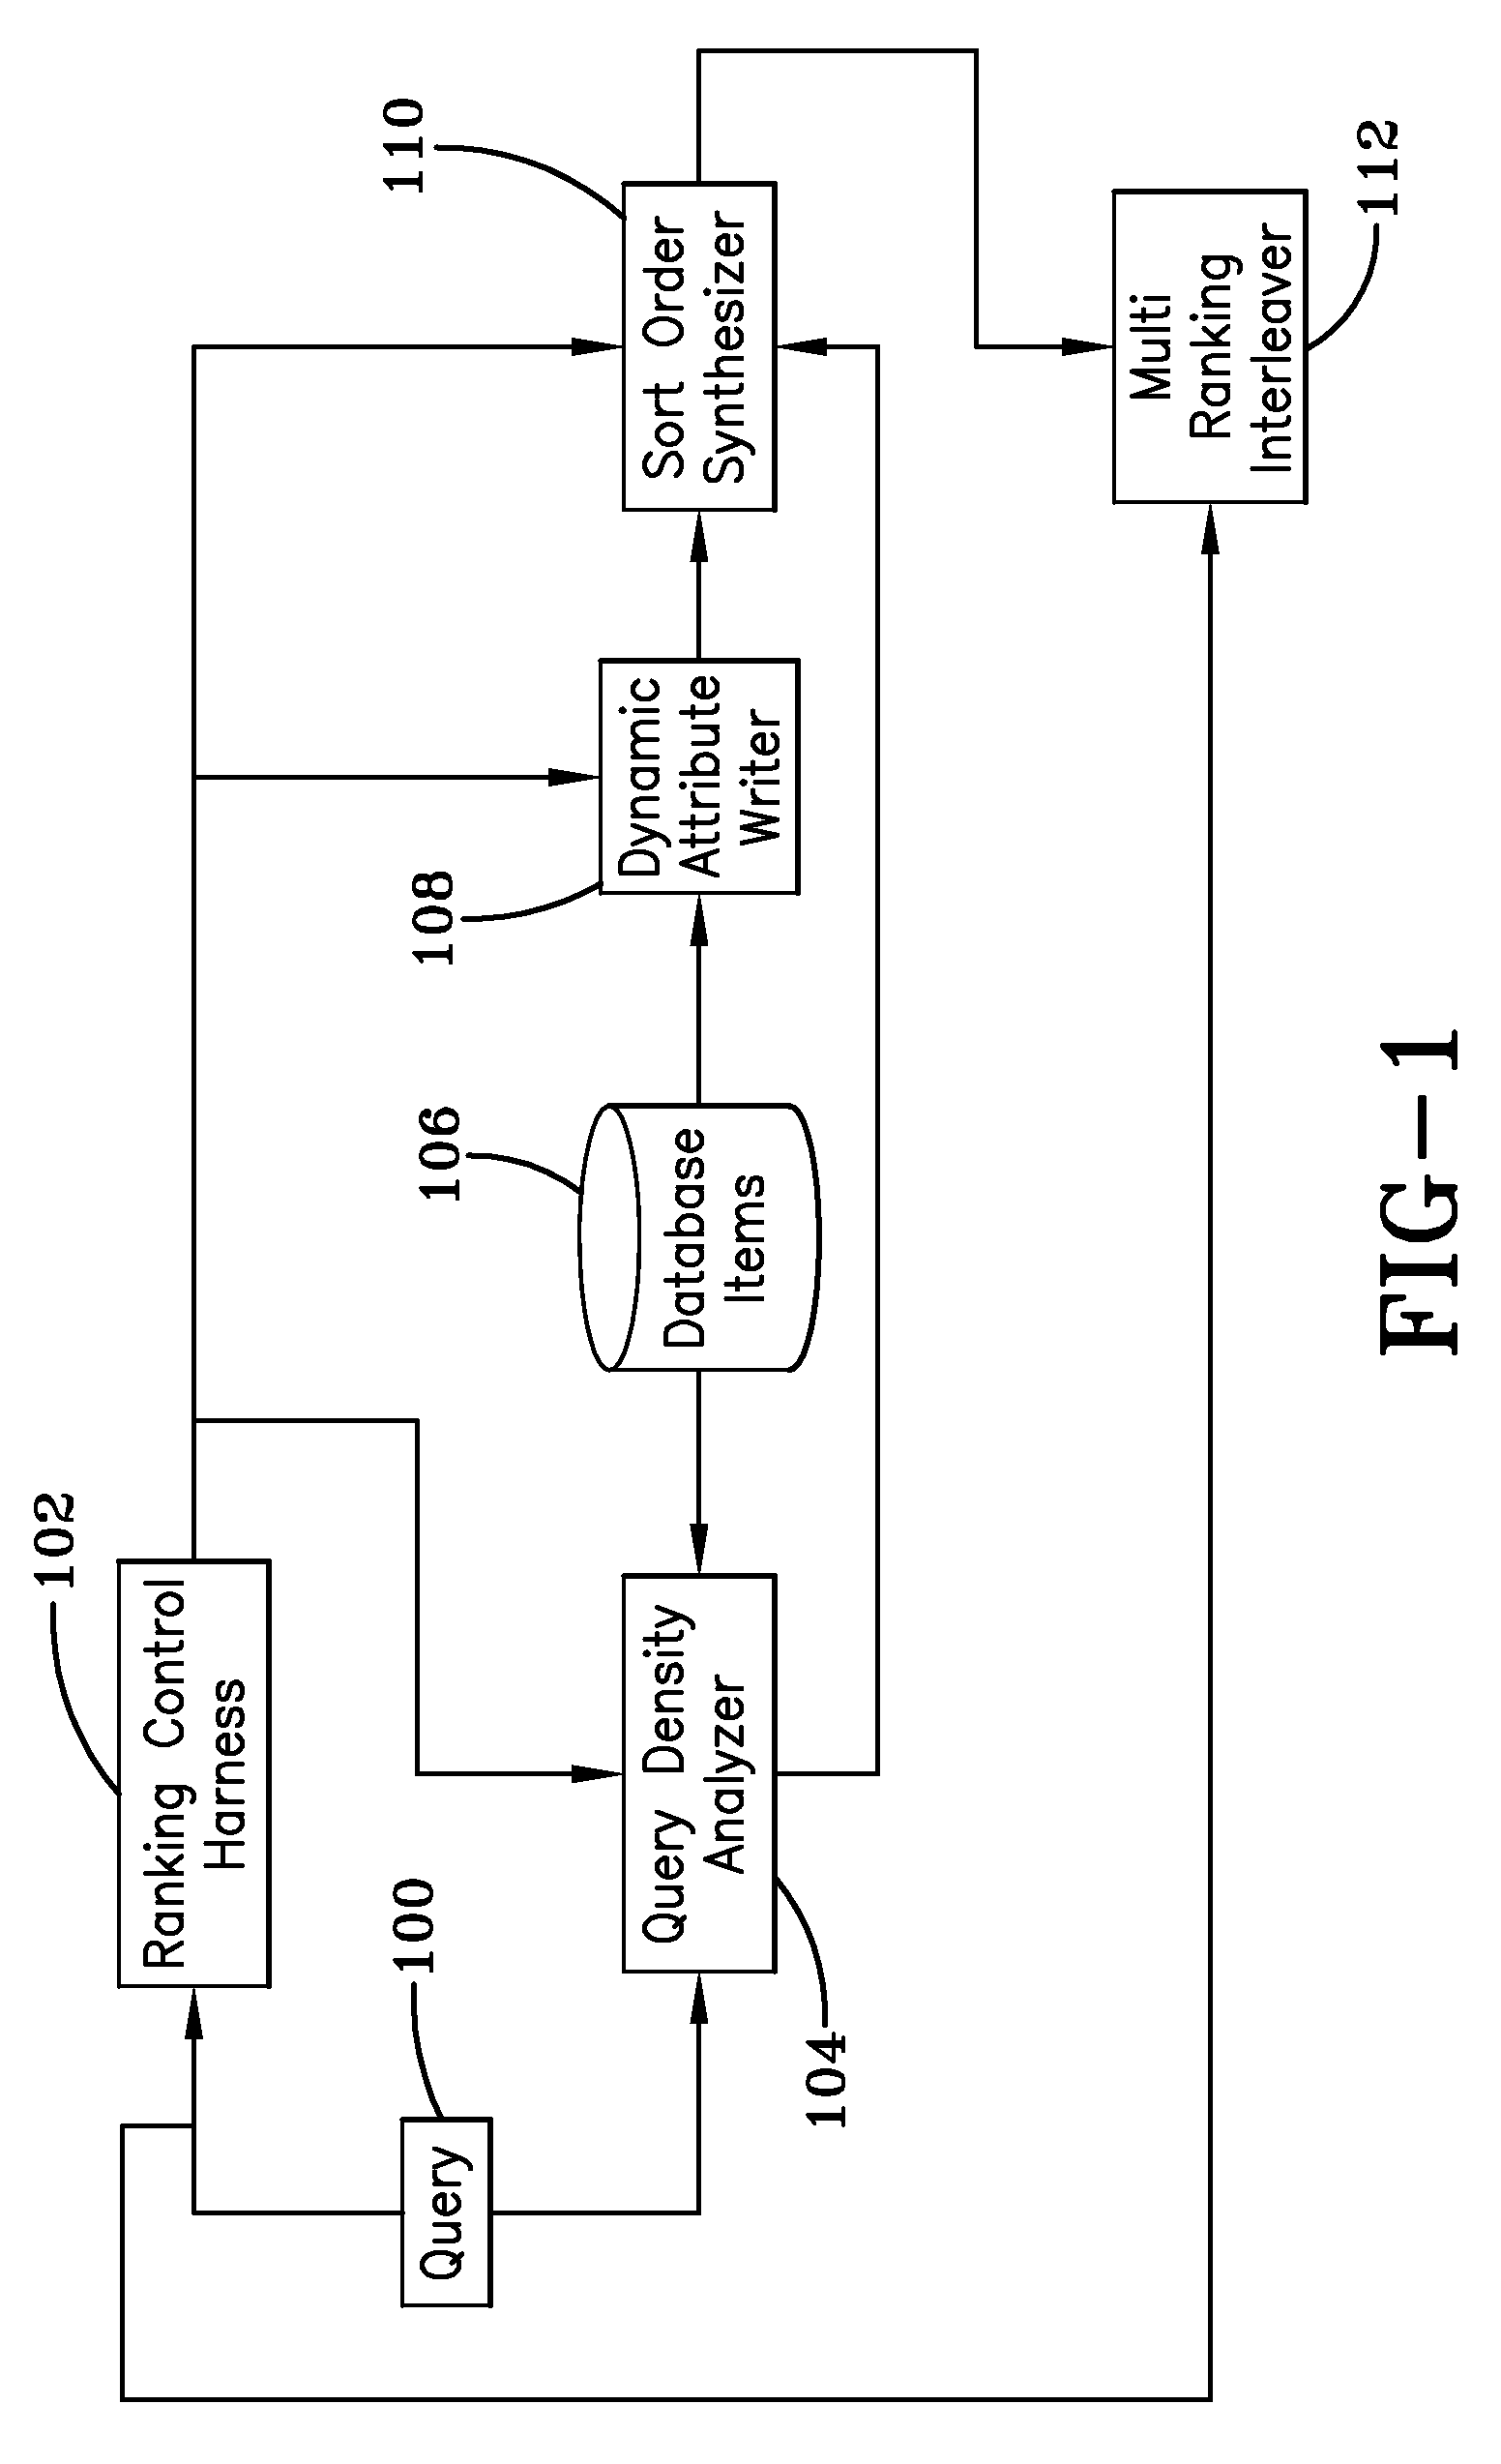 System and method for trans-factor ranking of search results